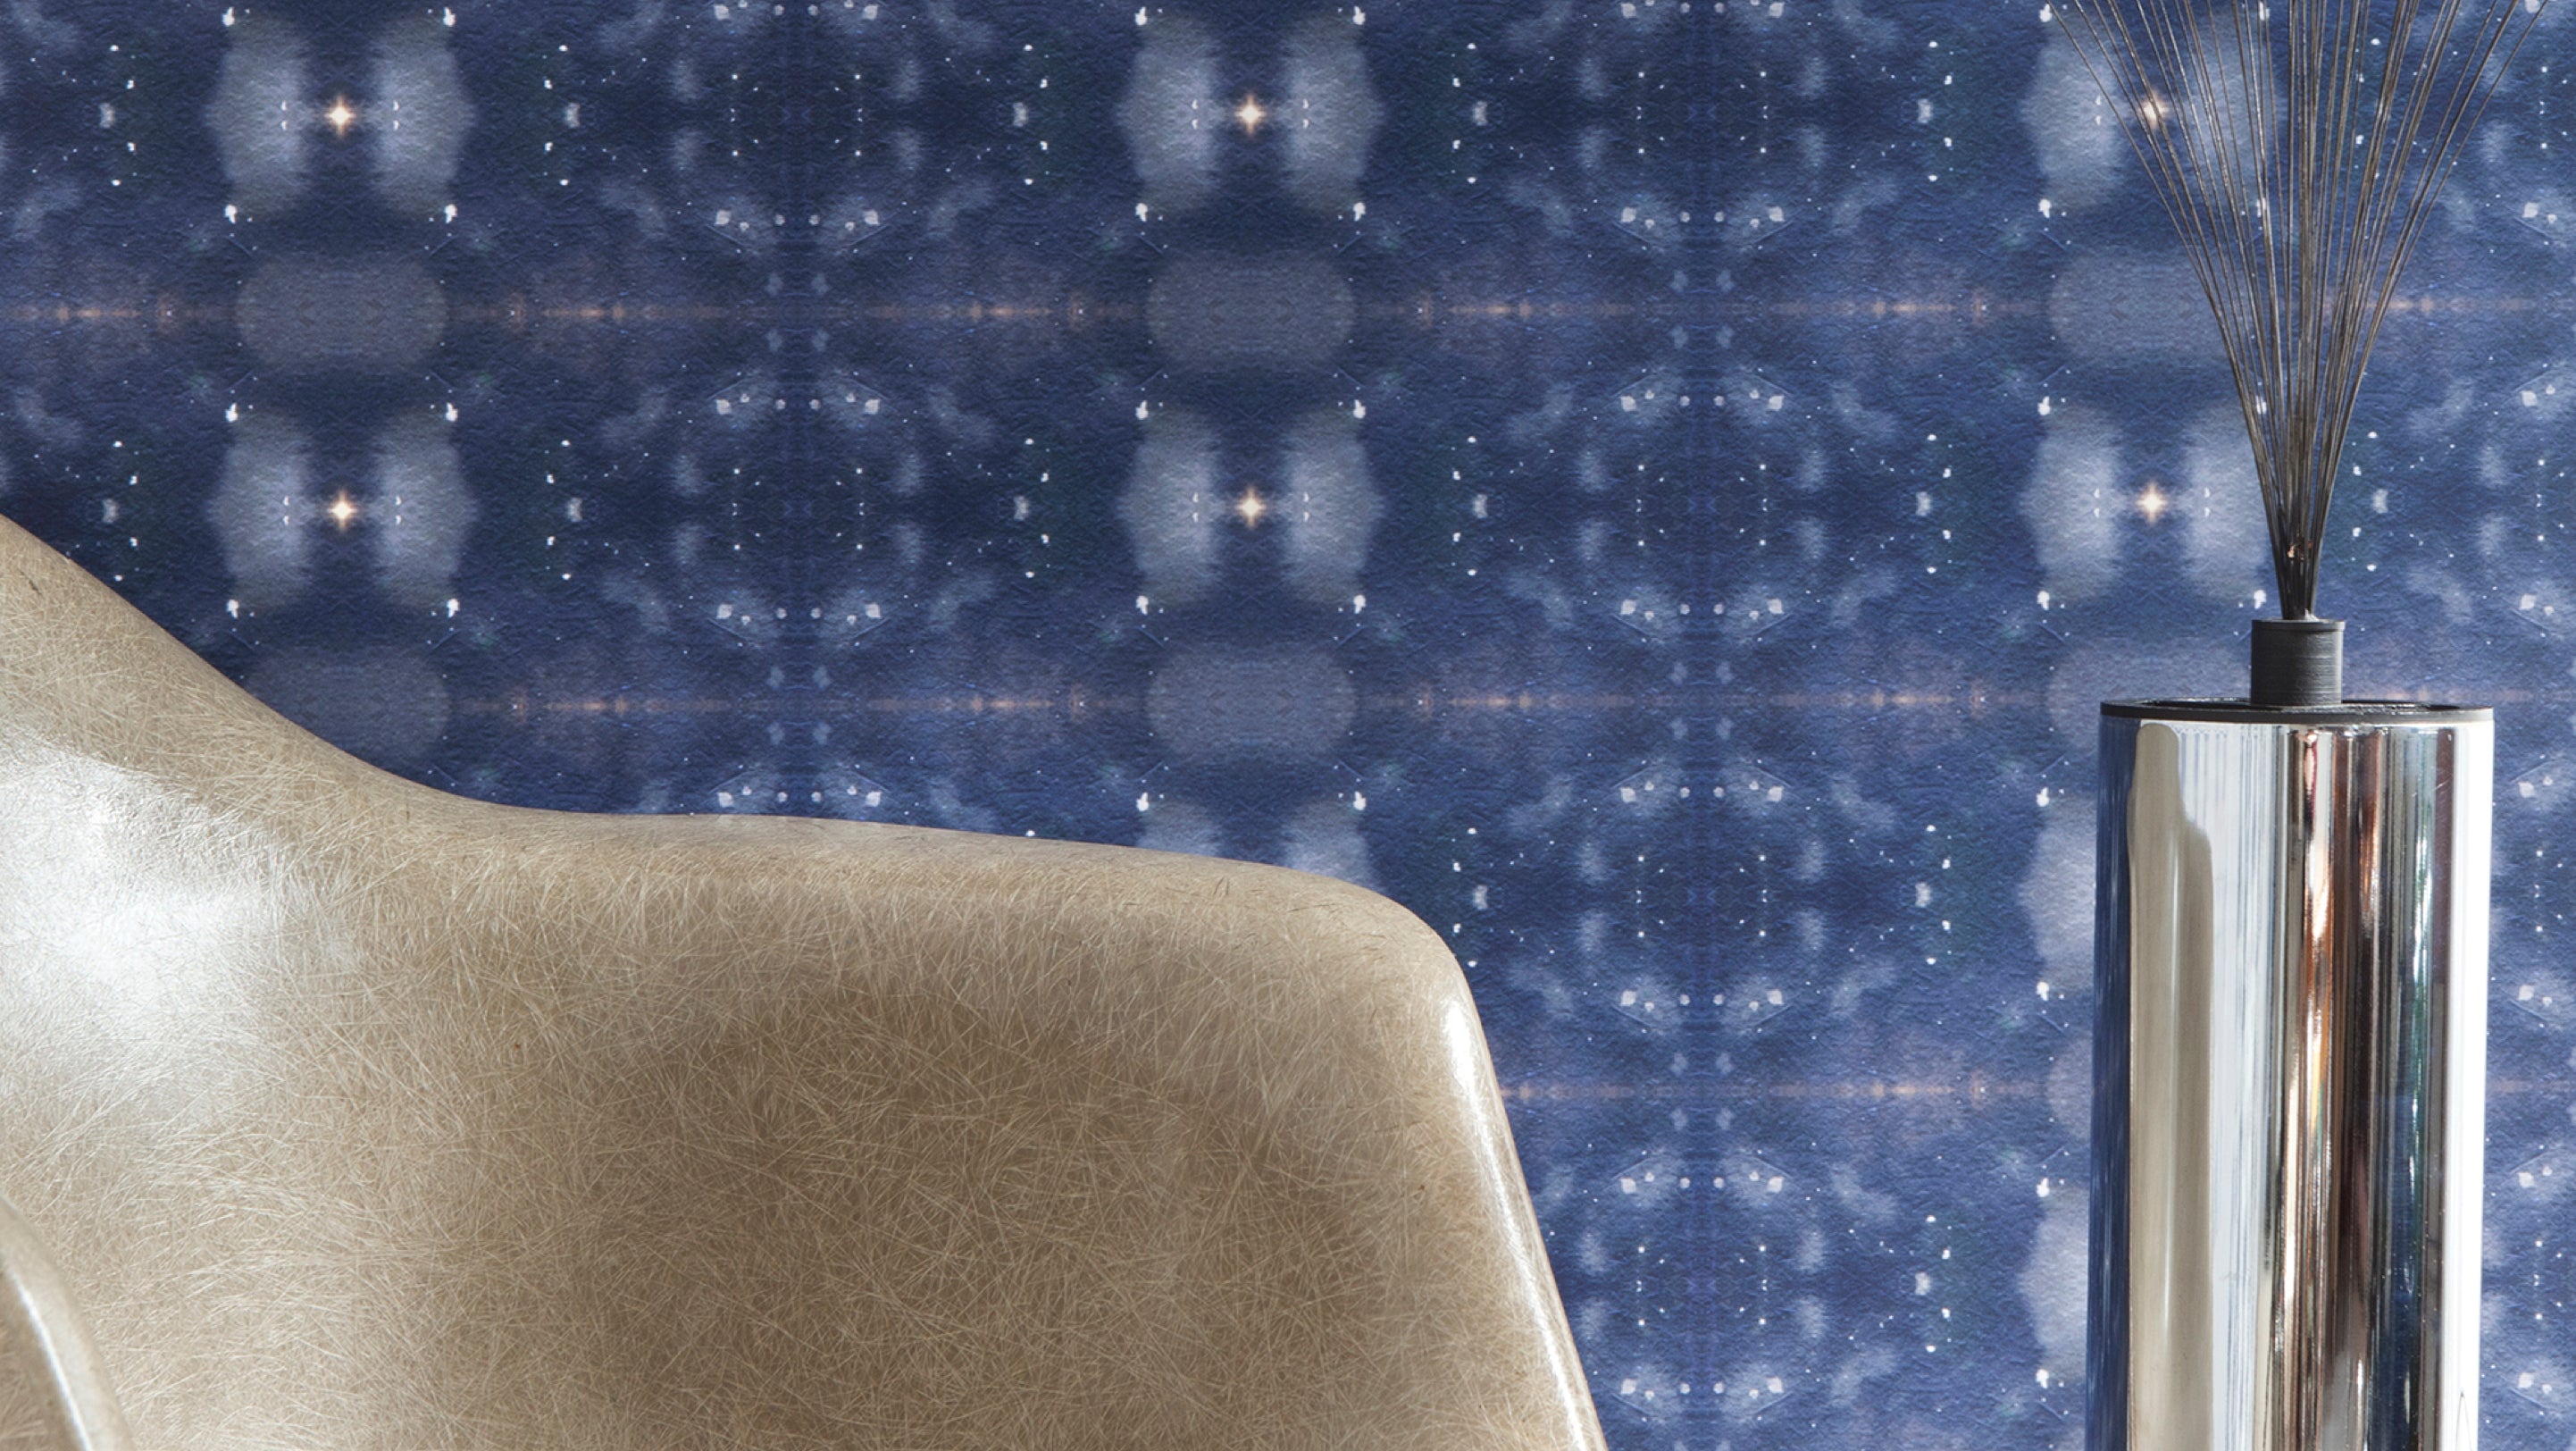 A chair in front of a blue wallpaper